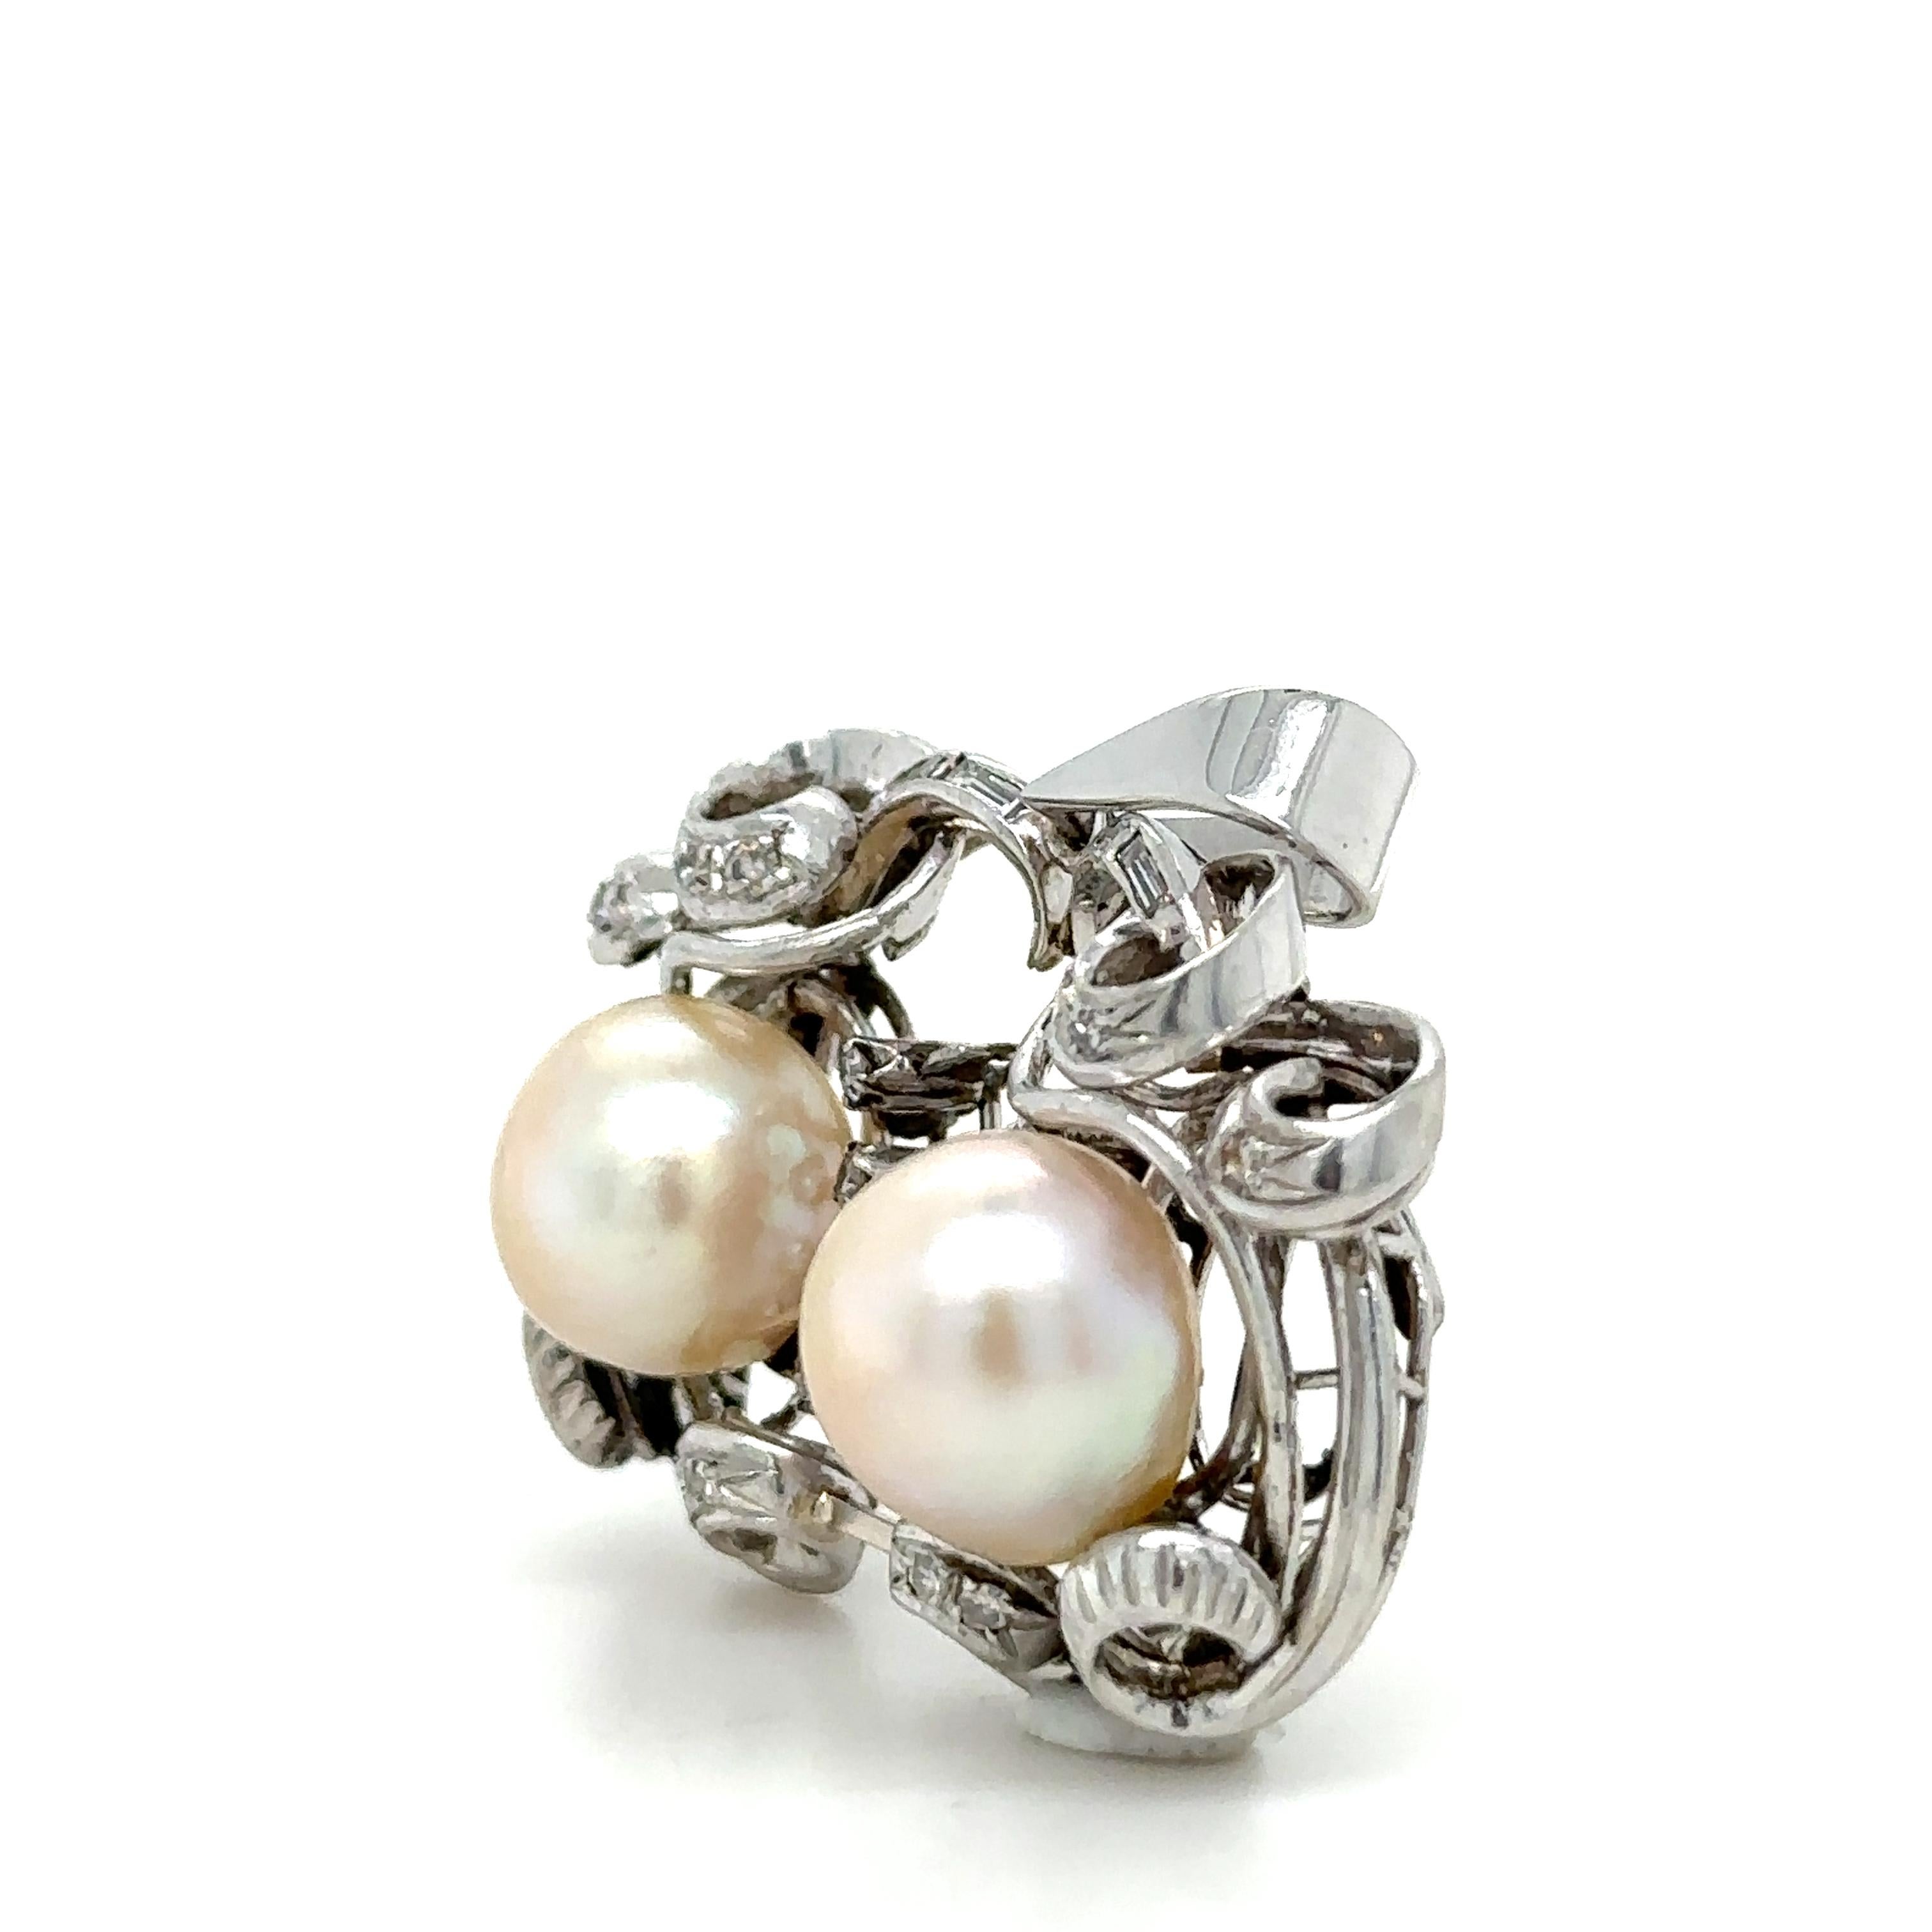 A Pearl And Diamond Brooch, with two 10mm semi-baroque Akoya cultured pearls, 22 single cut diamonds and 4 baguette cut diamonds set in platinum.

Diamonds 26 = 0.45ct (estimated), G/VS to SI

Metal: Platinum 
Carat: 0.45ct 
Colour: G
Clarity: